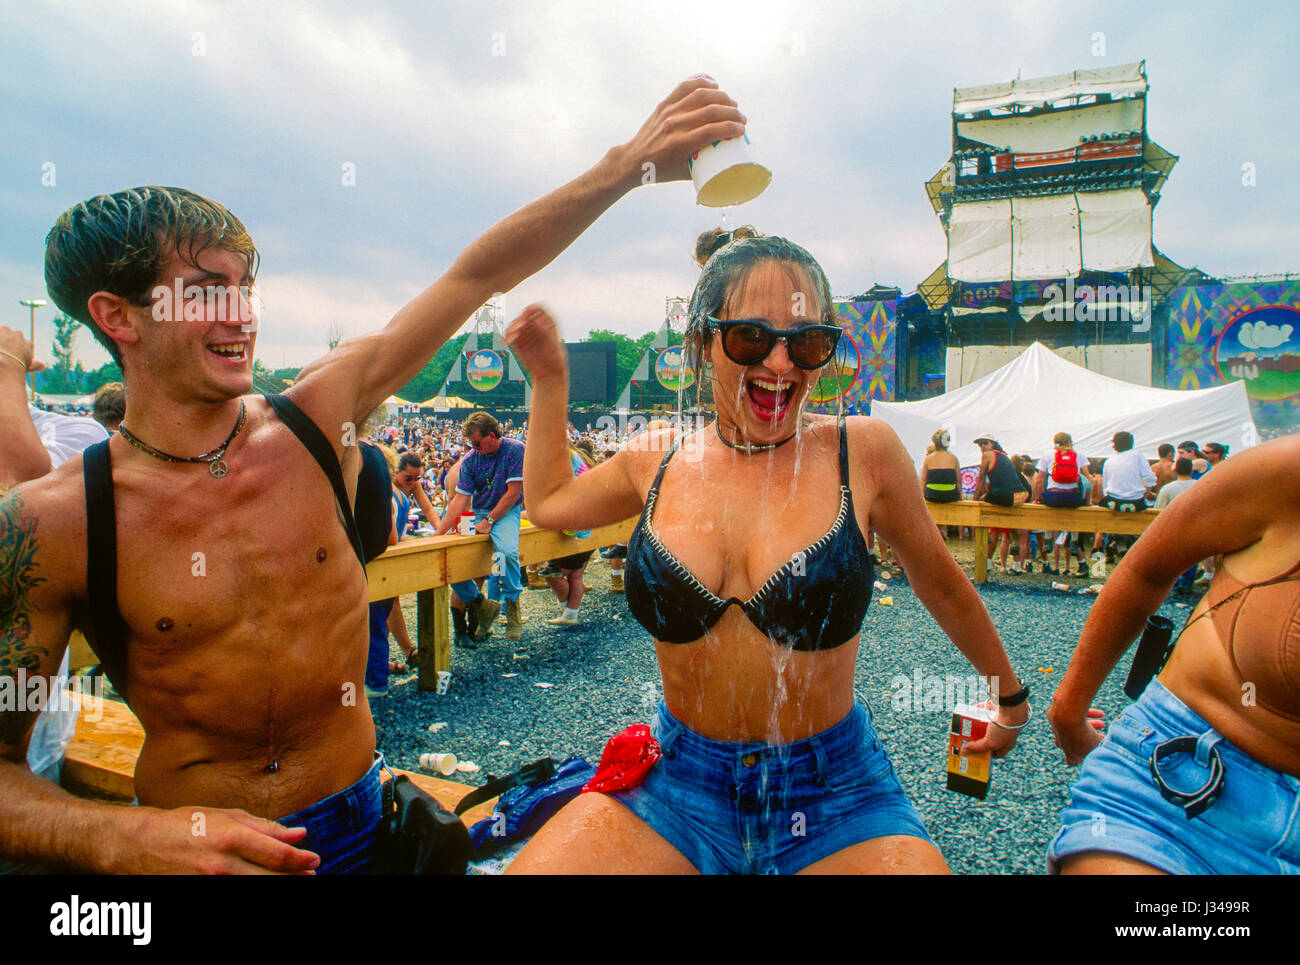 Woman concert goer gets a cup of water poured over her head in an effort to keep cool while attending the 25th anniversary of the orginal Woodstock music festival which took place on the WInston Farm in Saugerties New York, August 12, 1994.  Photo by Mark Reinstein Stock Photo